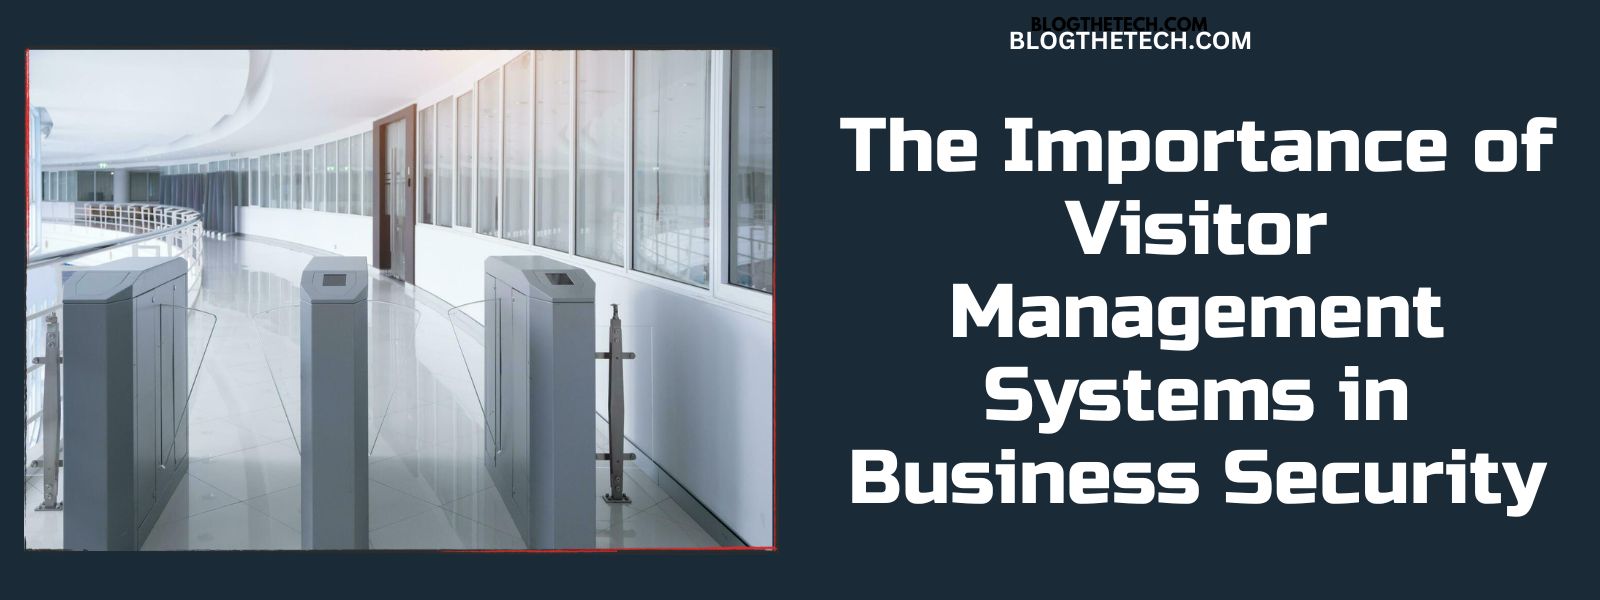 Visitor Management Systems in Business Security